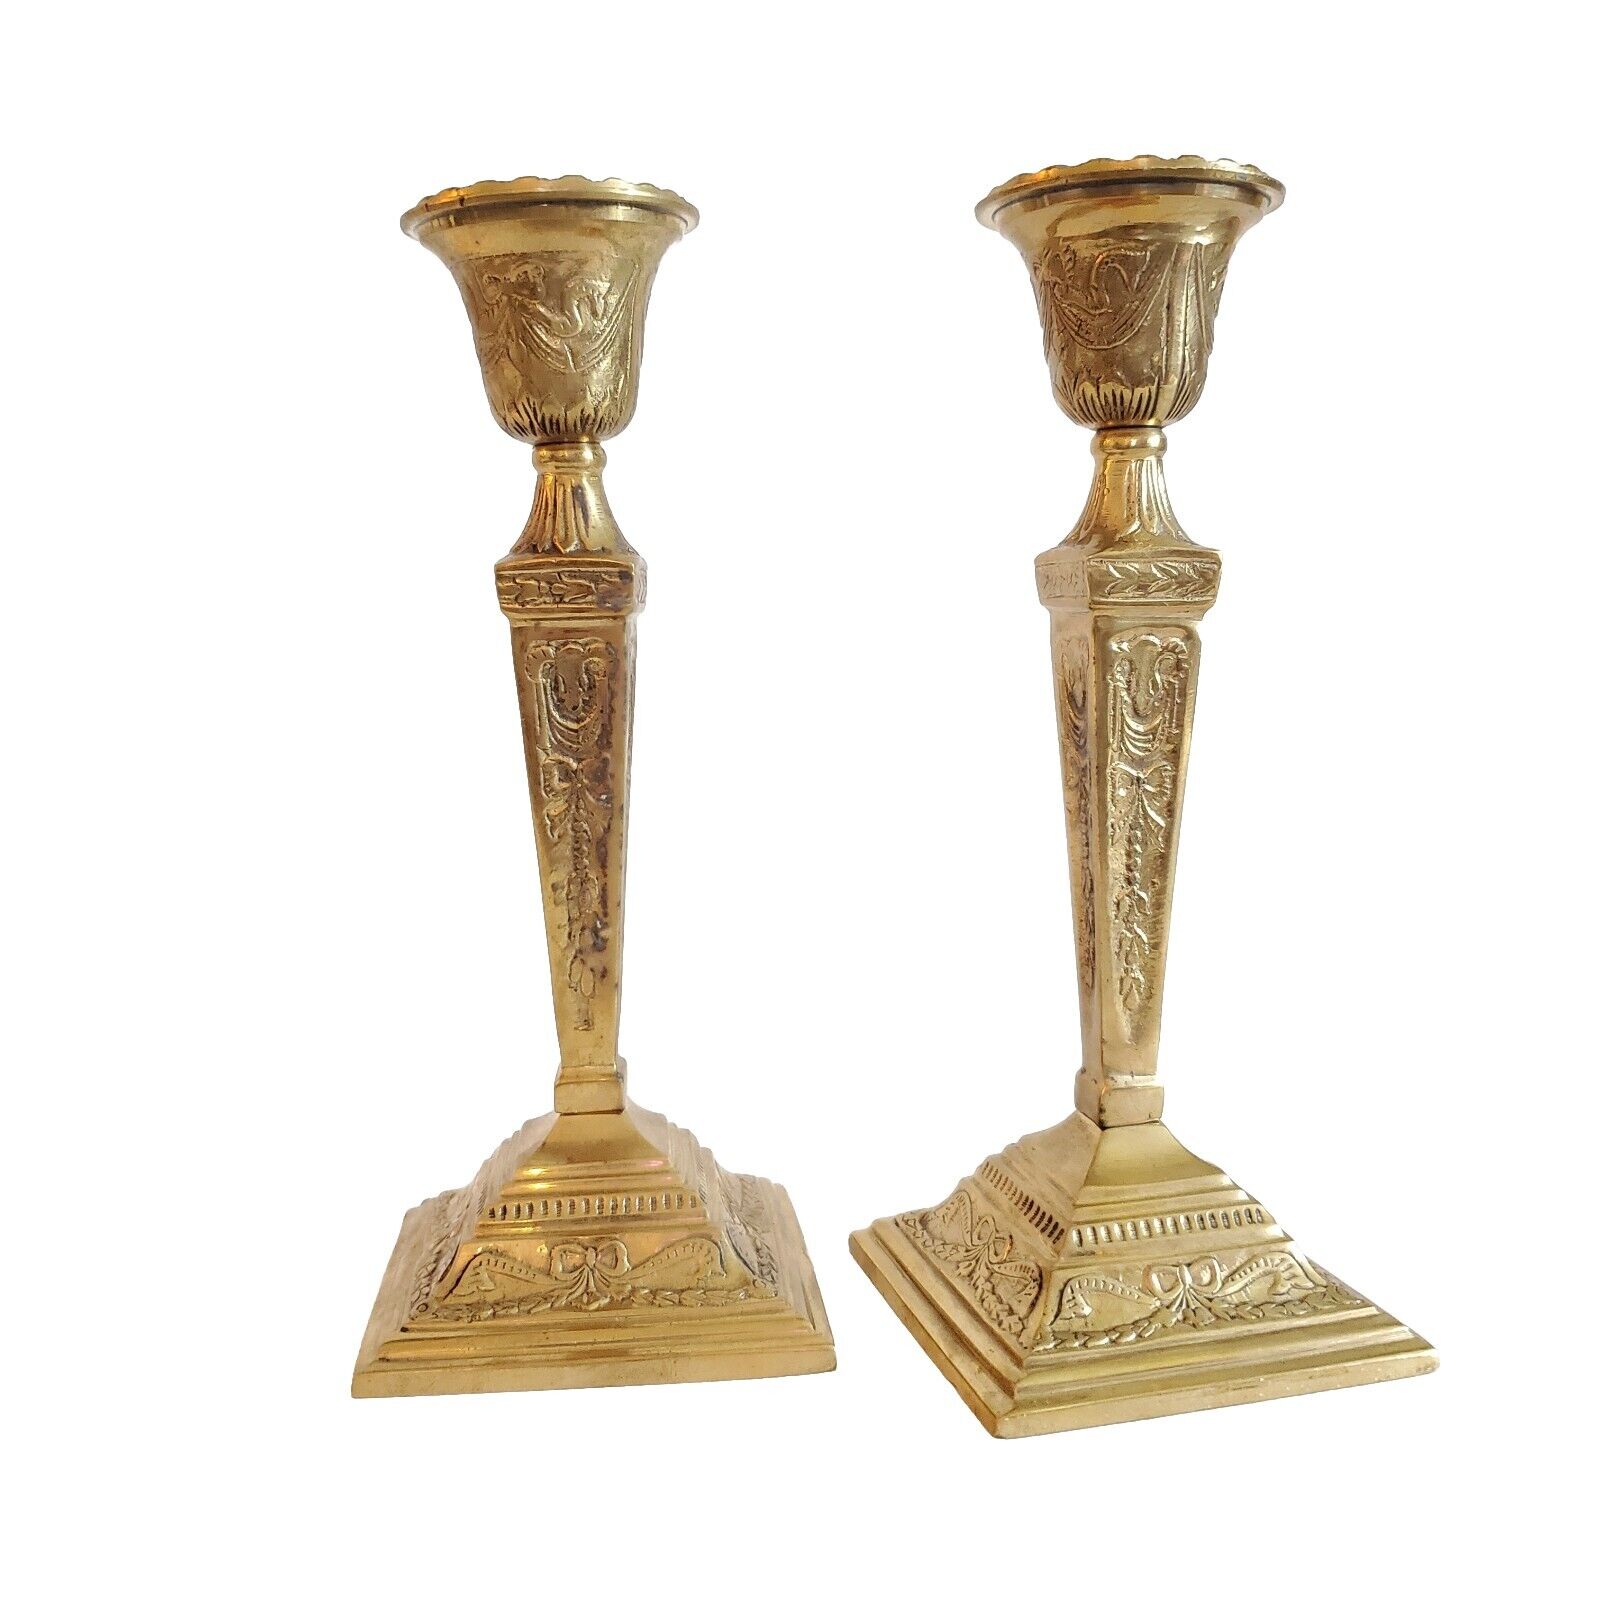 GORGEOUS PAIR OF HEAVY BRASS CANDLE HOLDER ORNATE EMBELLISHED VICTORIAN DESIGN 